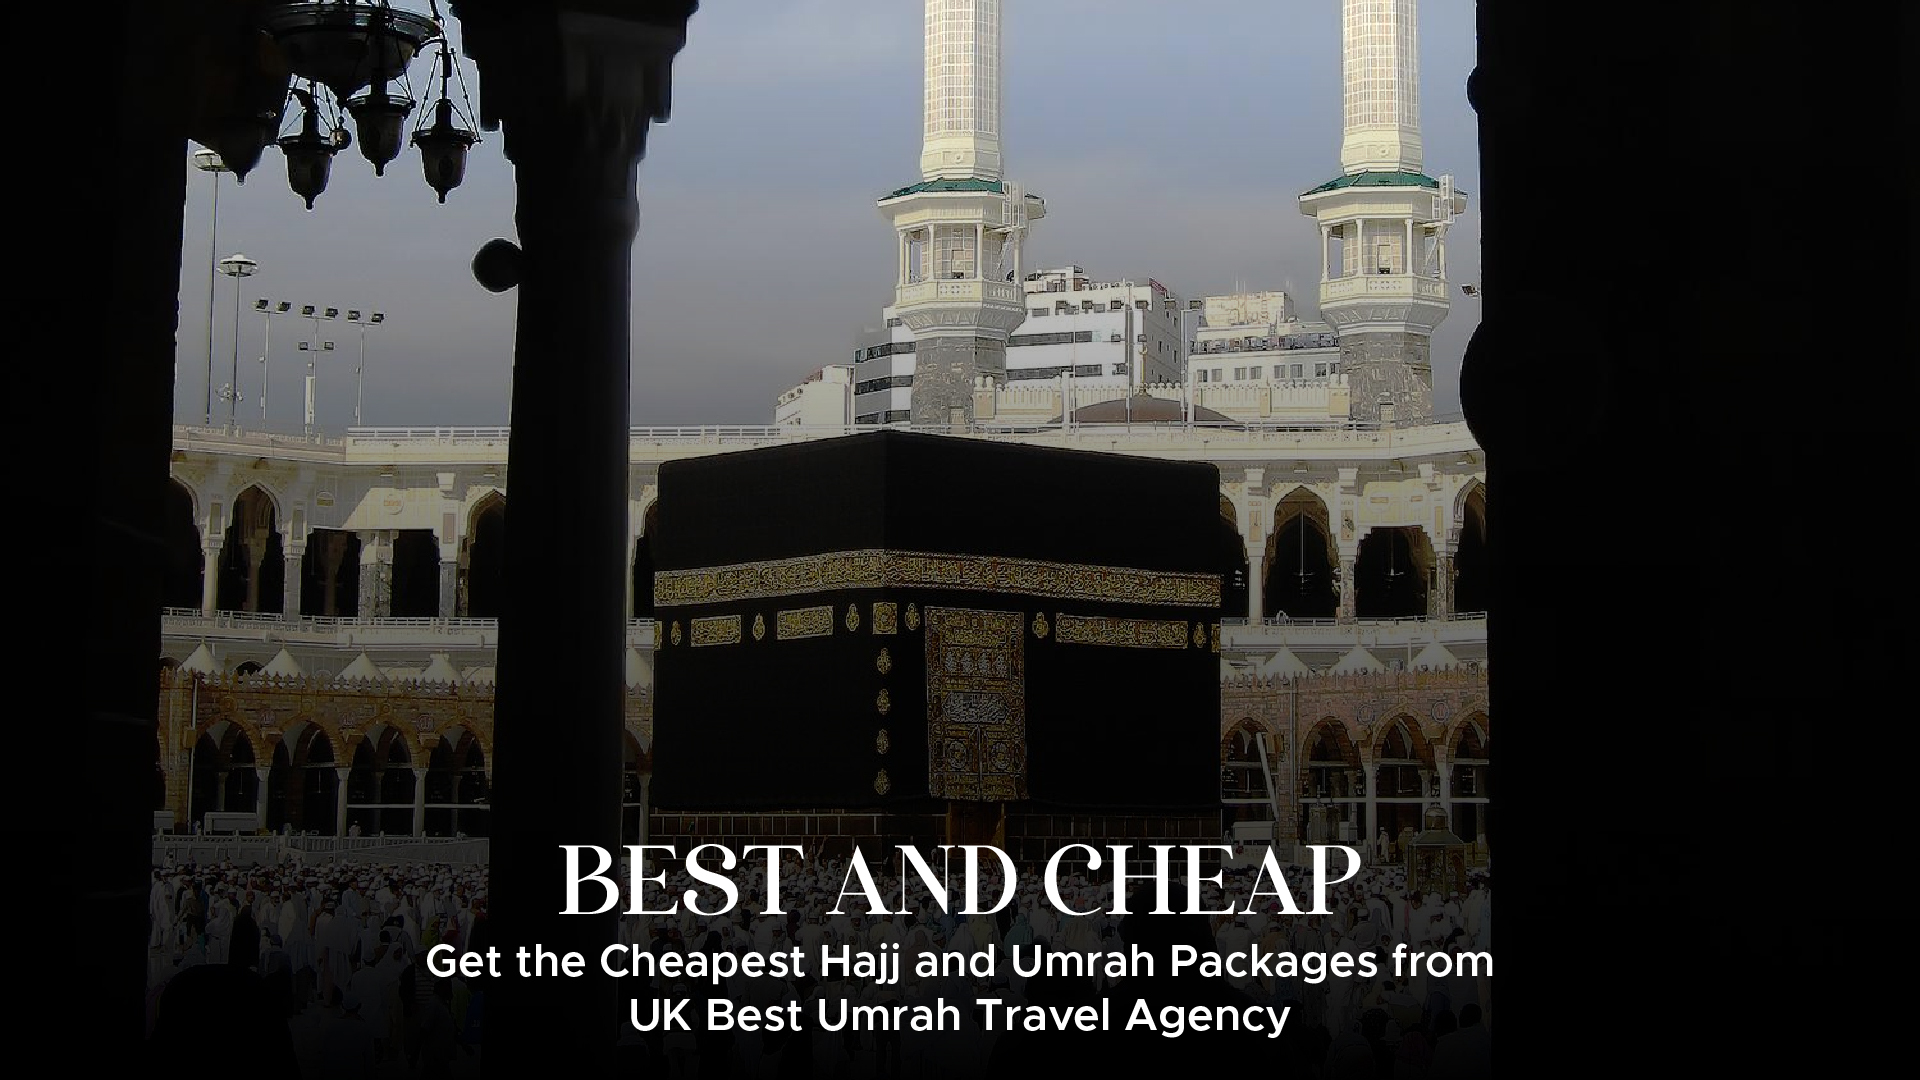 Cheapest Hajj and Umrah Packages from UK